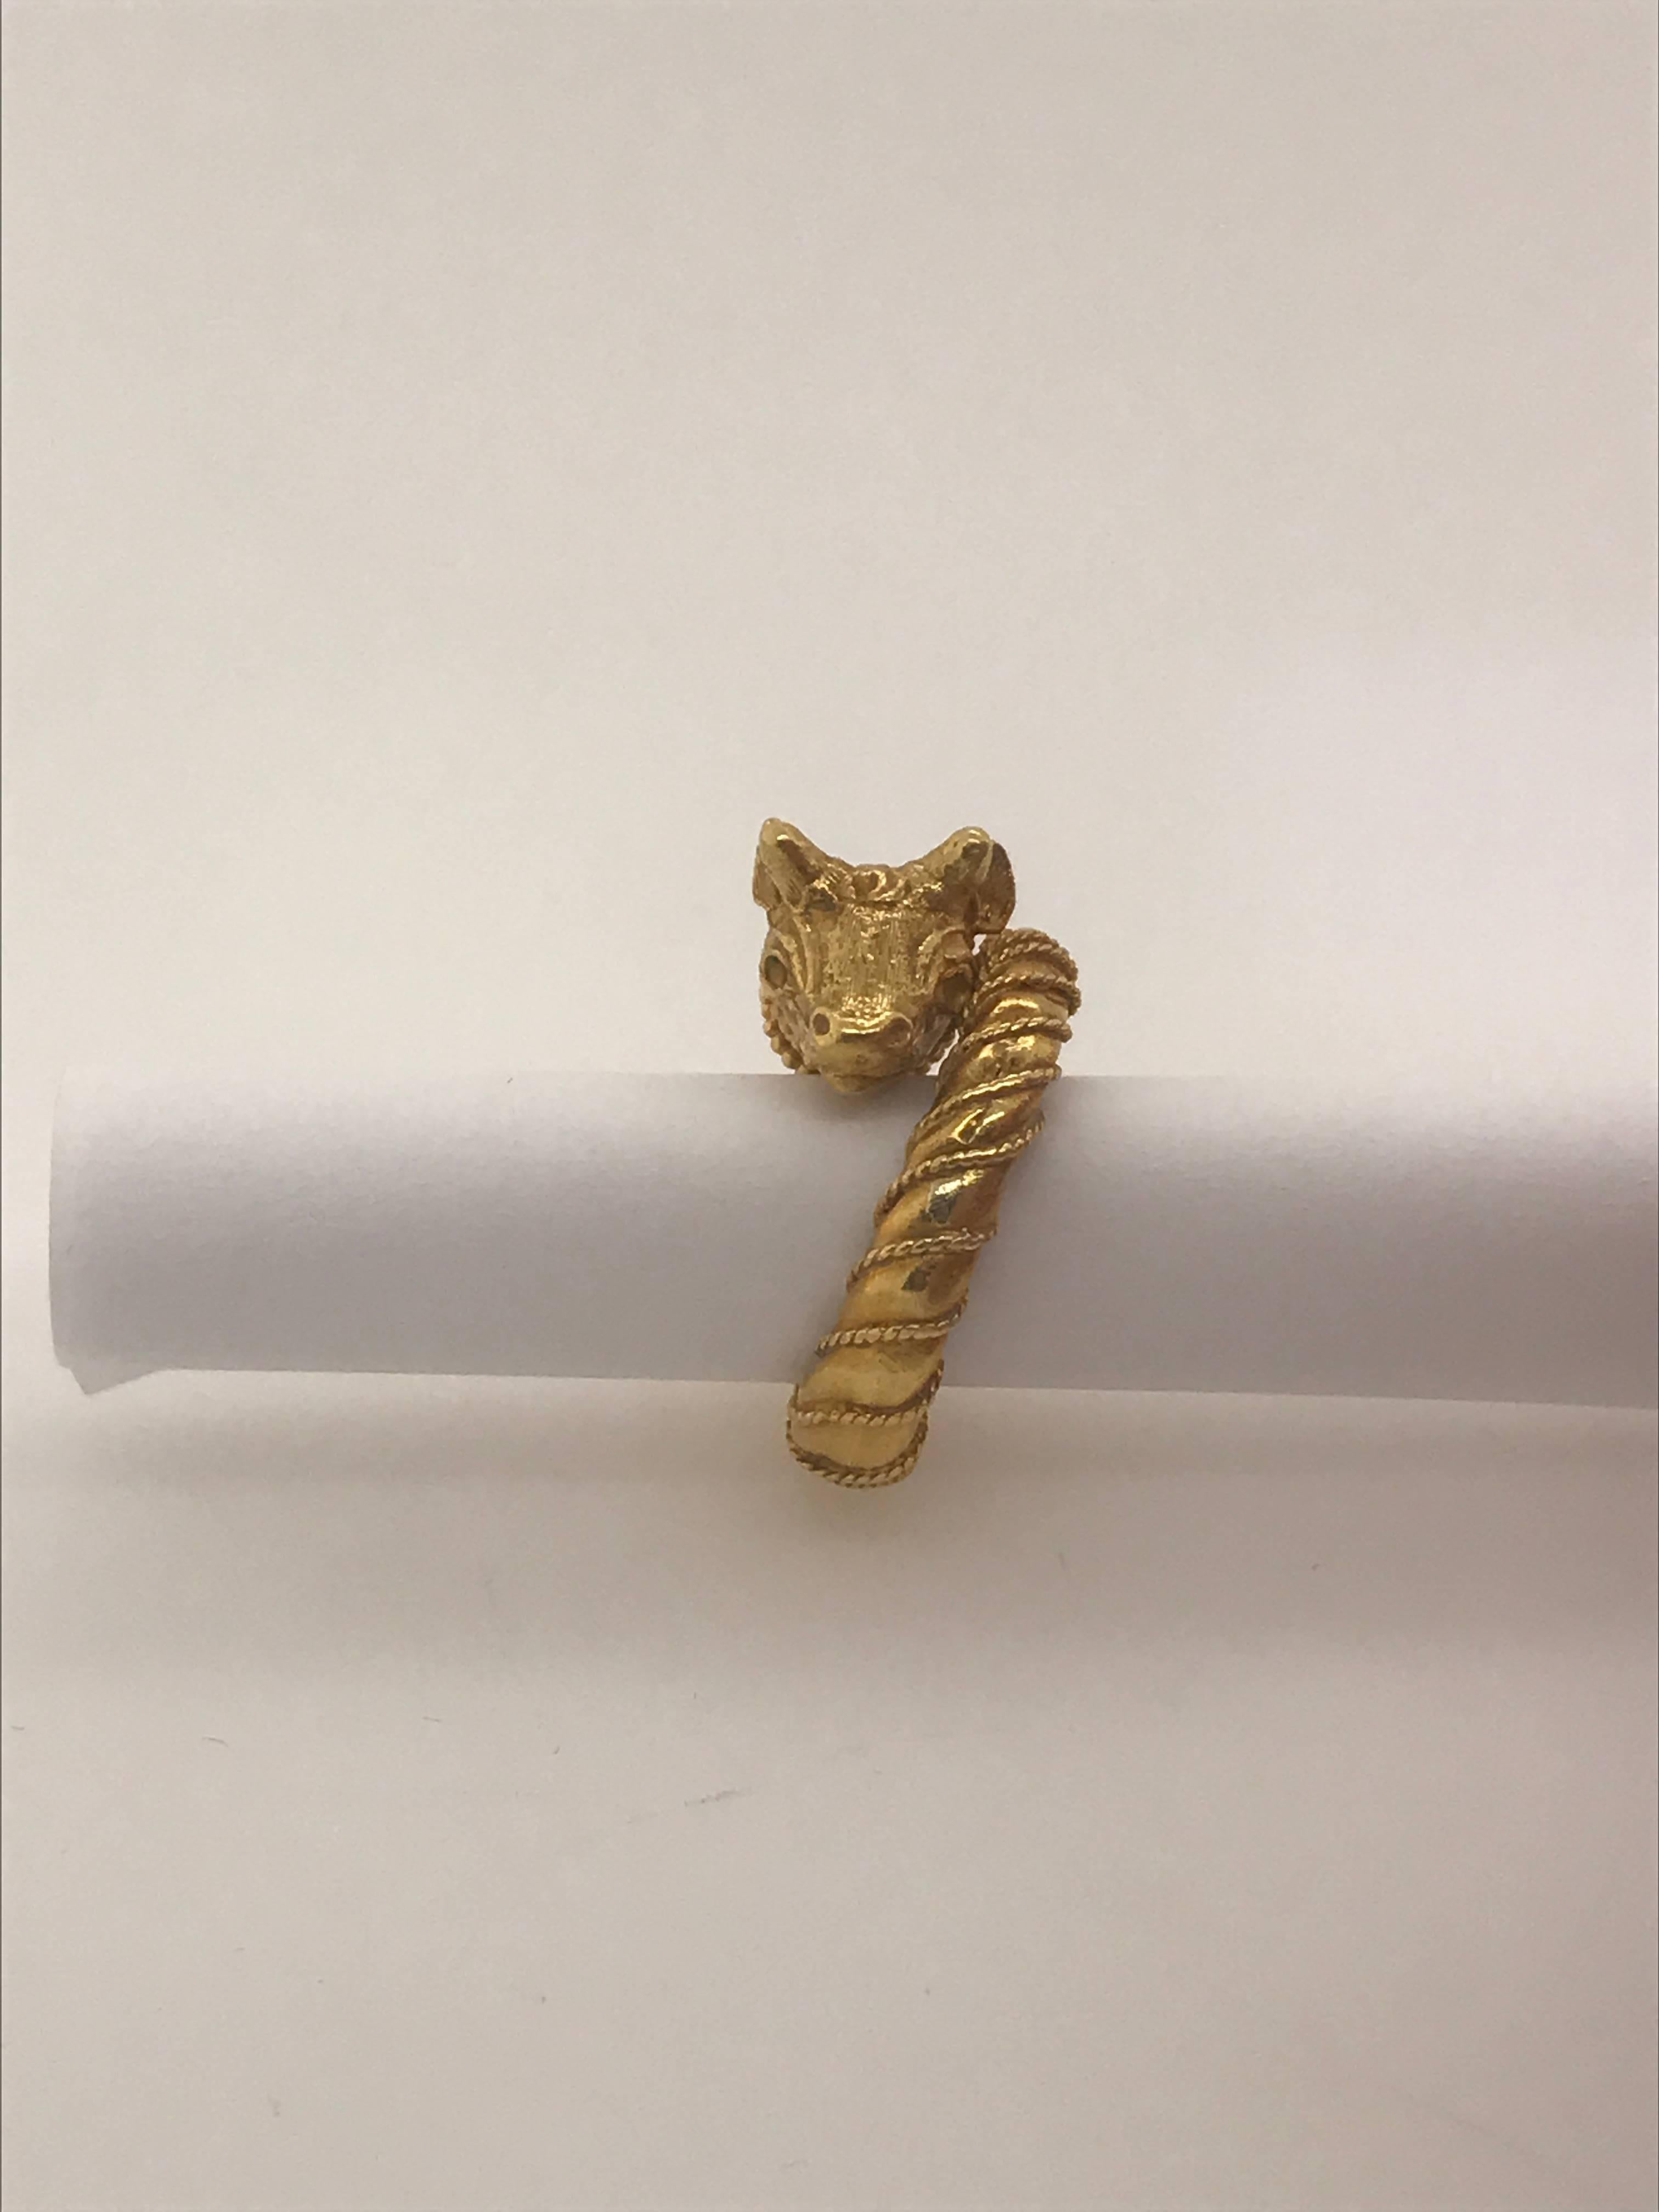 Decorative Ring by Zolotas in 22 Karat Yellow Gold 2